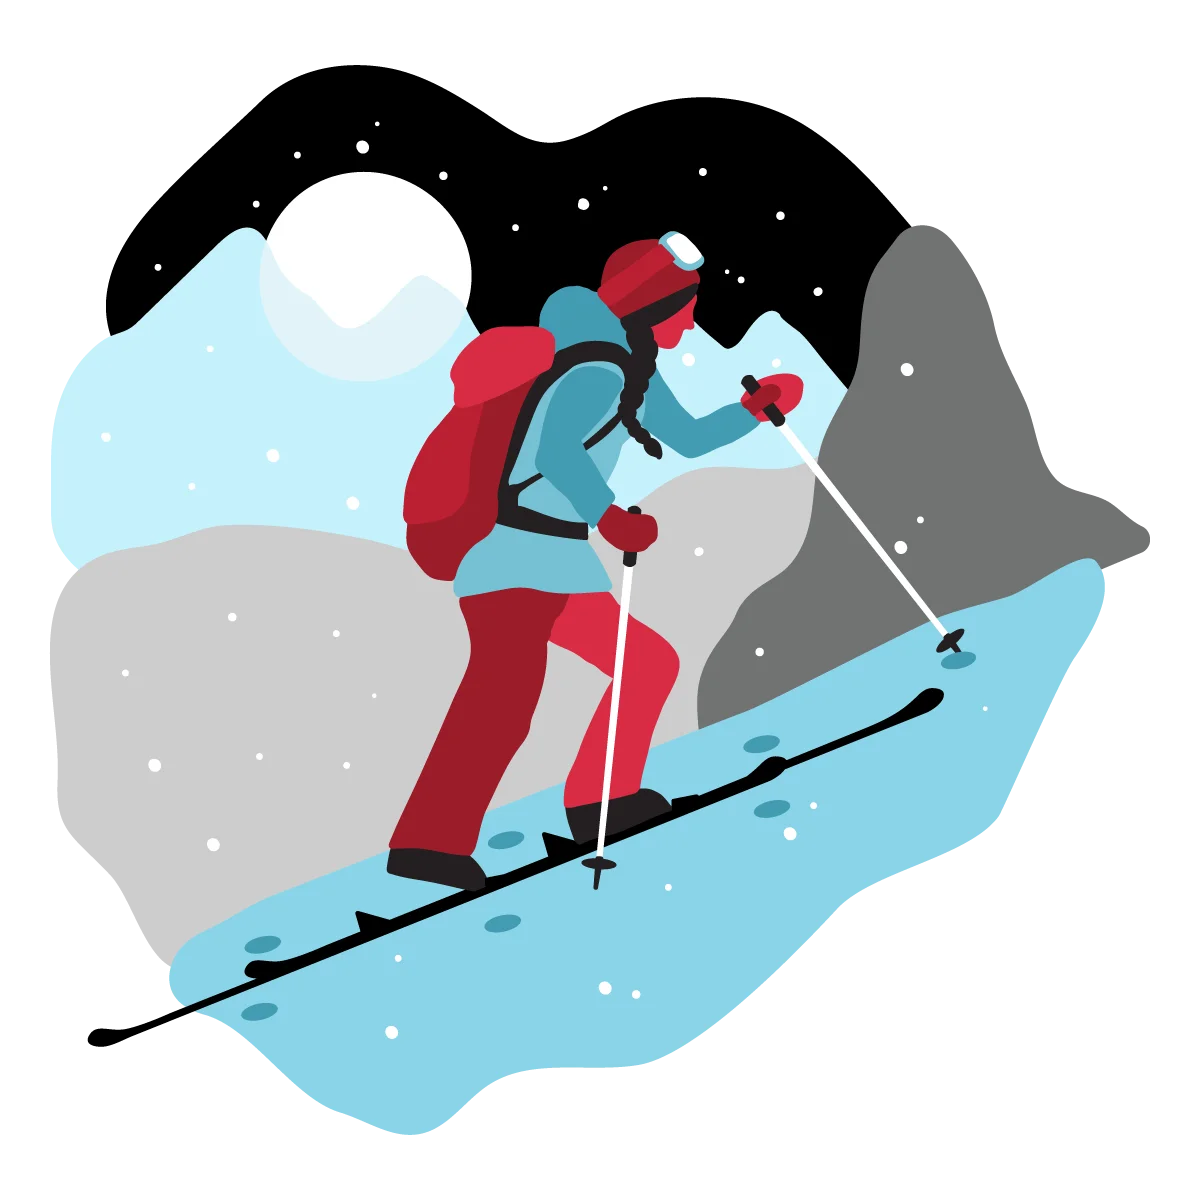 indigenous-women-outdoors-backcountry-skiing-snowboarding-illustration-1200x1200-2